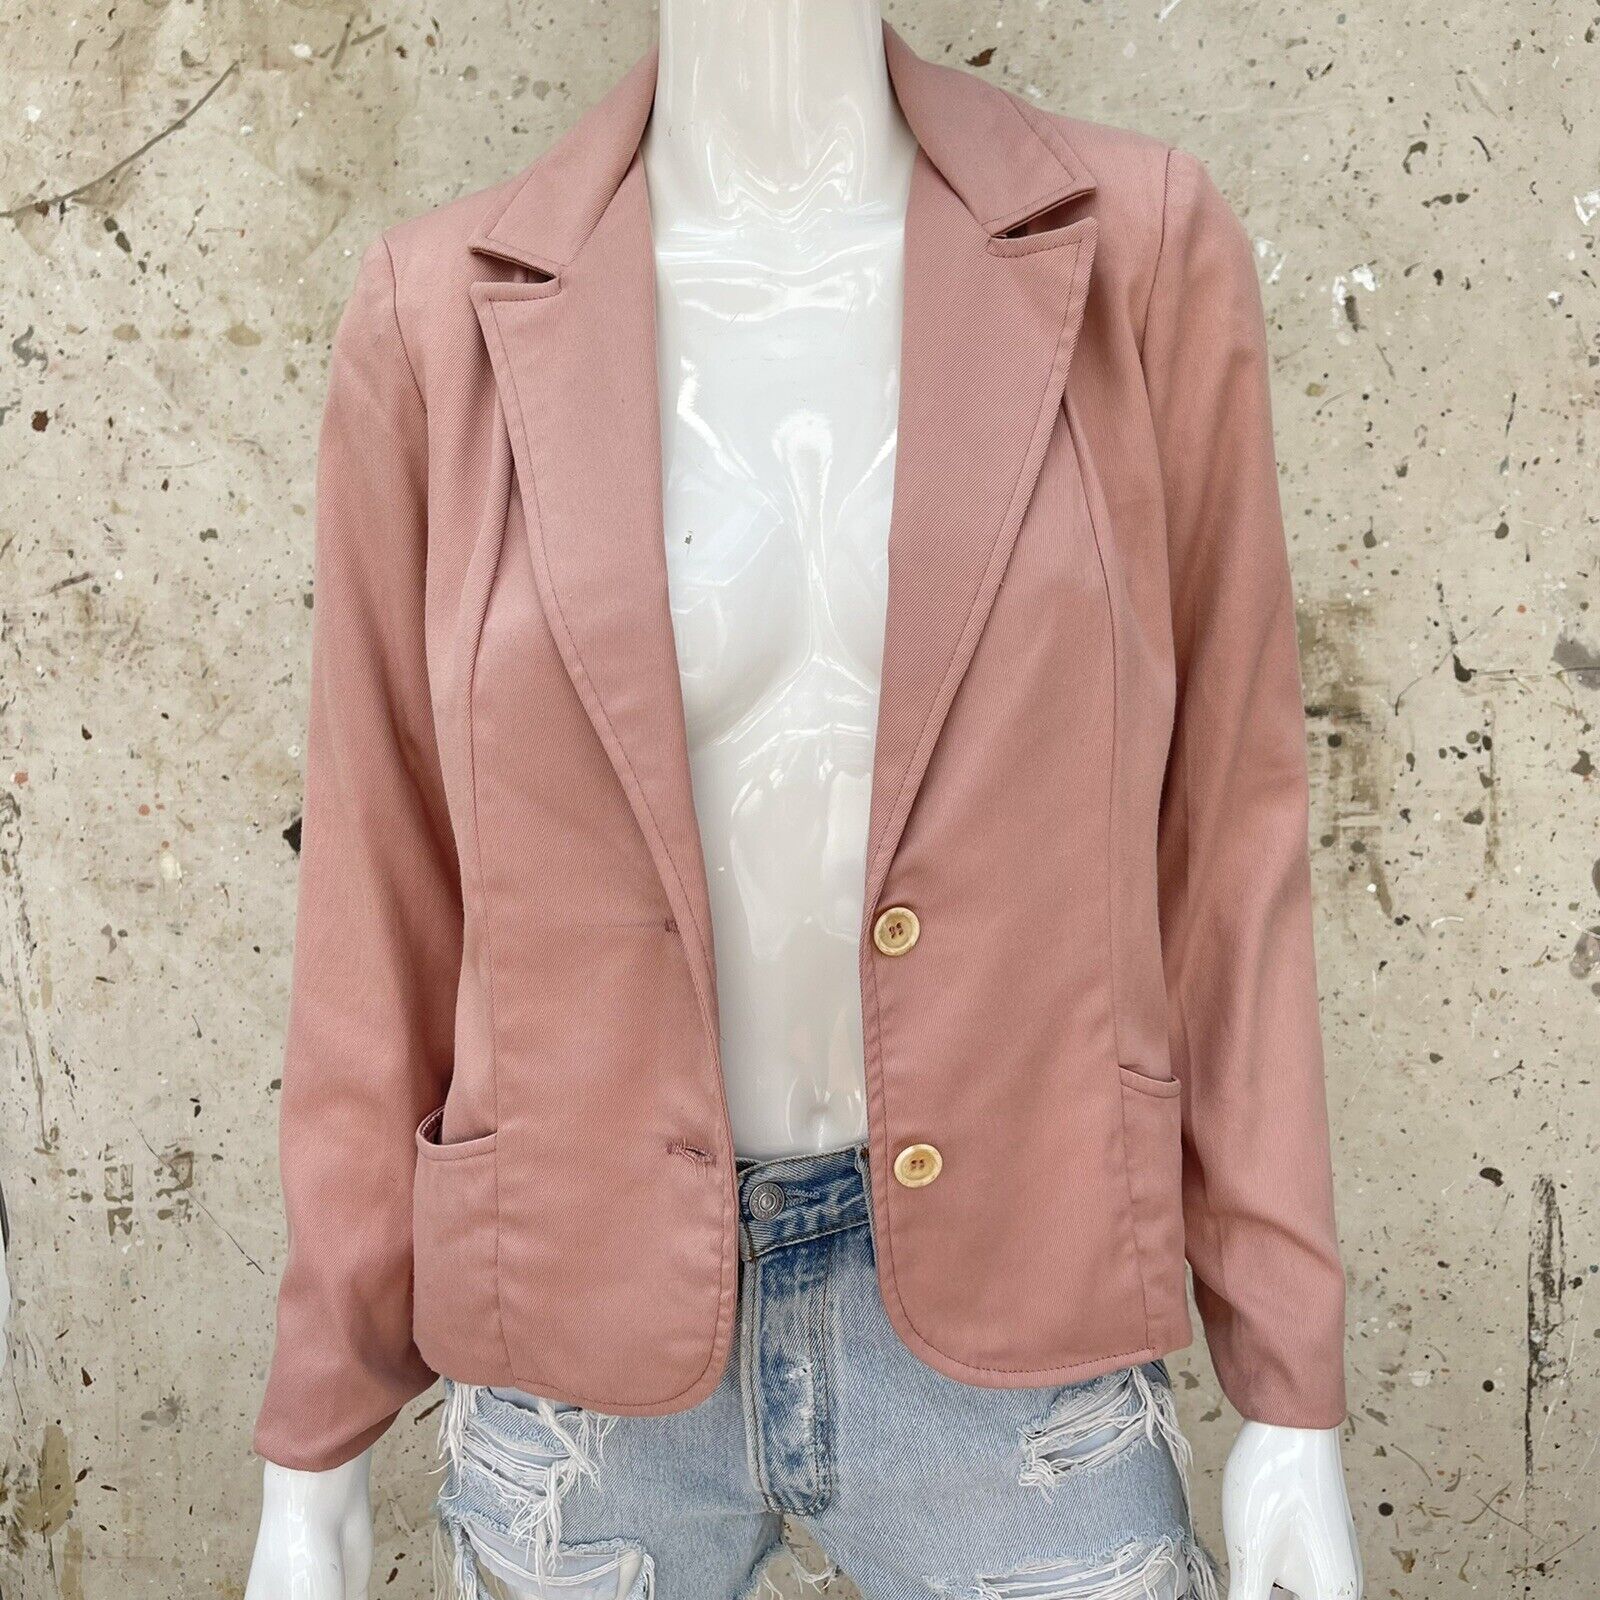 Vintage 70’s Dusty Rose Pink Cotton Blazer by Han… - image 5